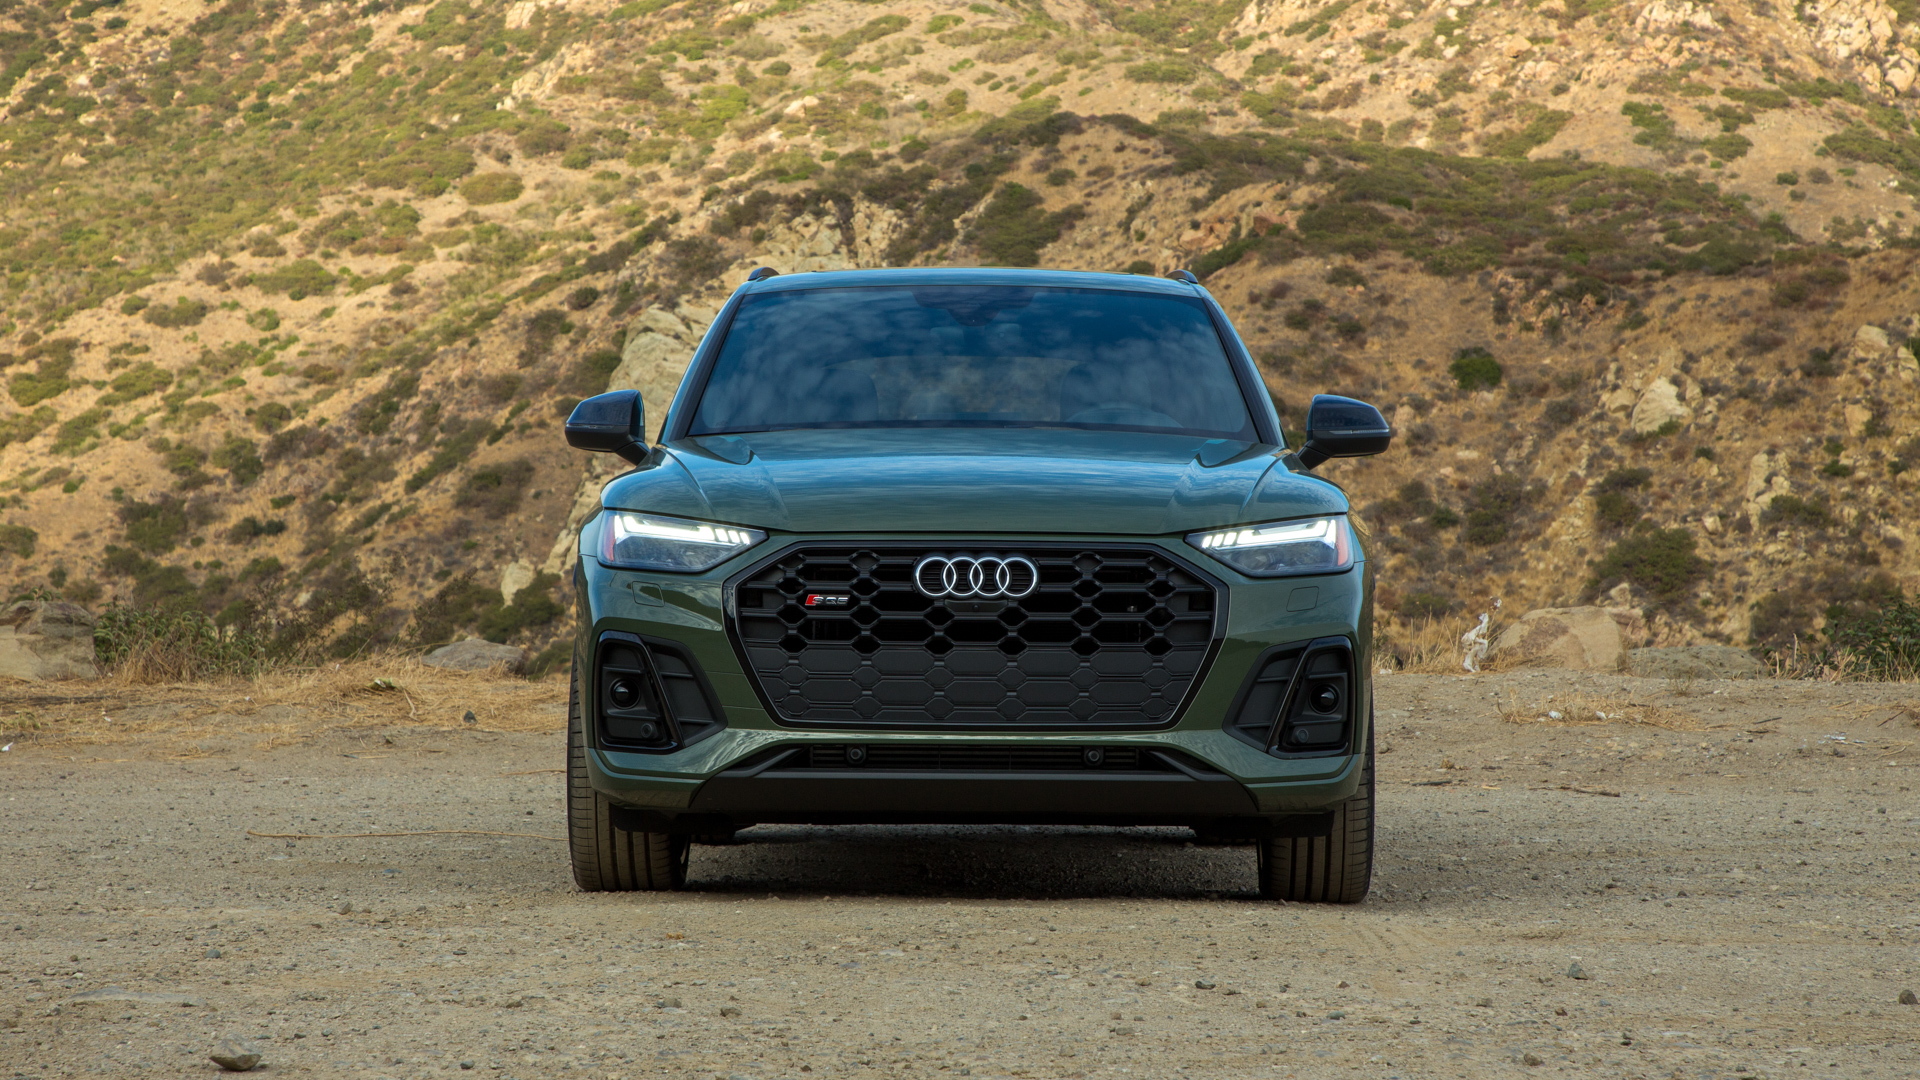 First drive review: 2021 Audi SQ5 attempts to spice up practicality